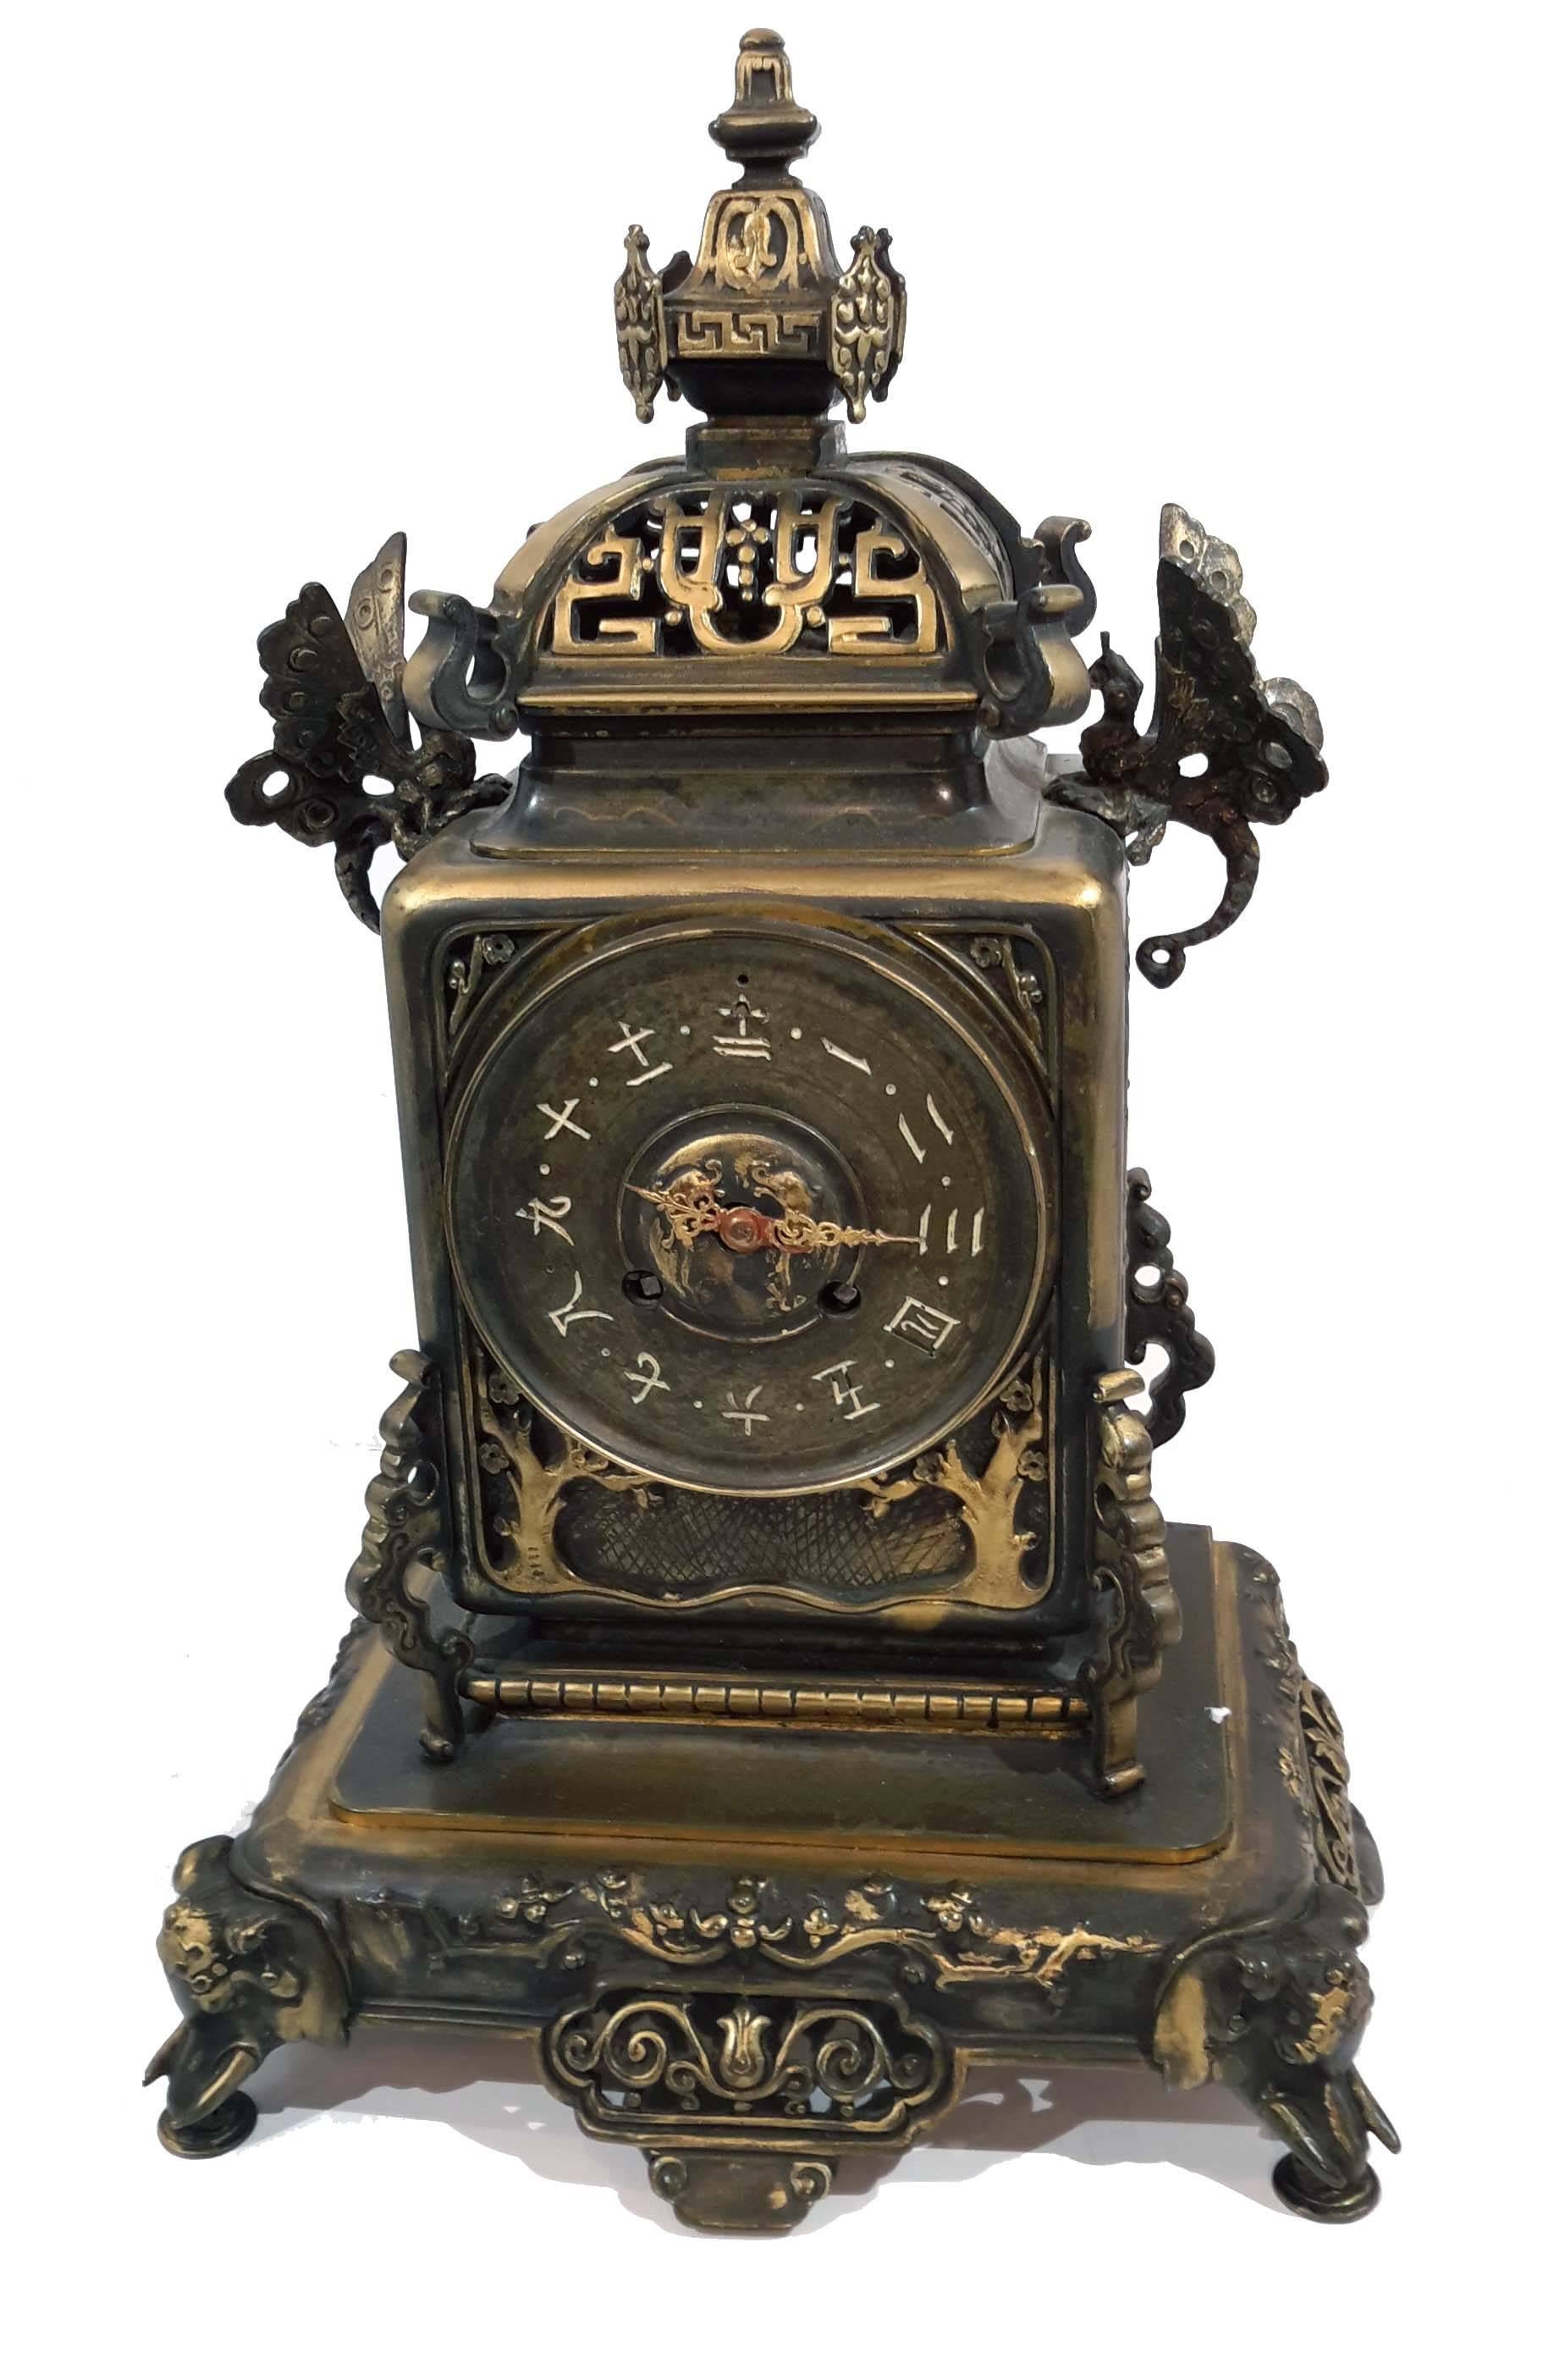 Exotic design possibly by Edouard Lievre, with butterflies and elephant feet.
Gilt decoration an patinated bronze structure.

Measures: Clock high 16 inches, width 10 inches, depth 7 inches
Candelabras high 17 inches, width 9 1/4 inches, depth 5